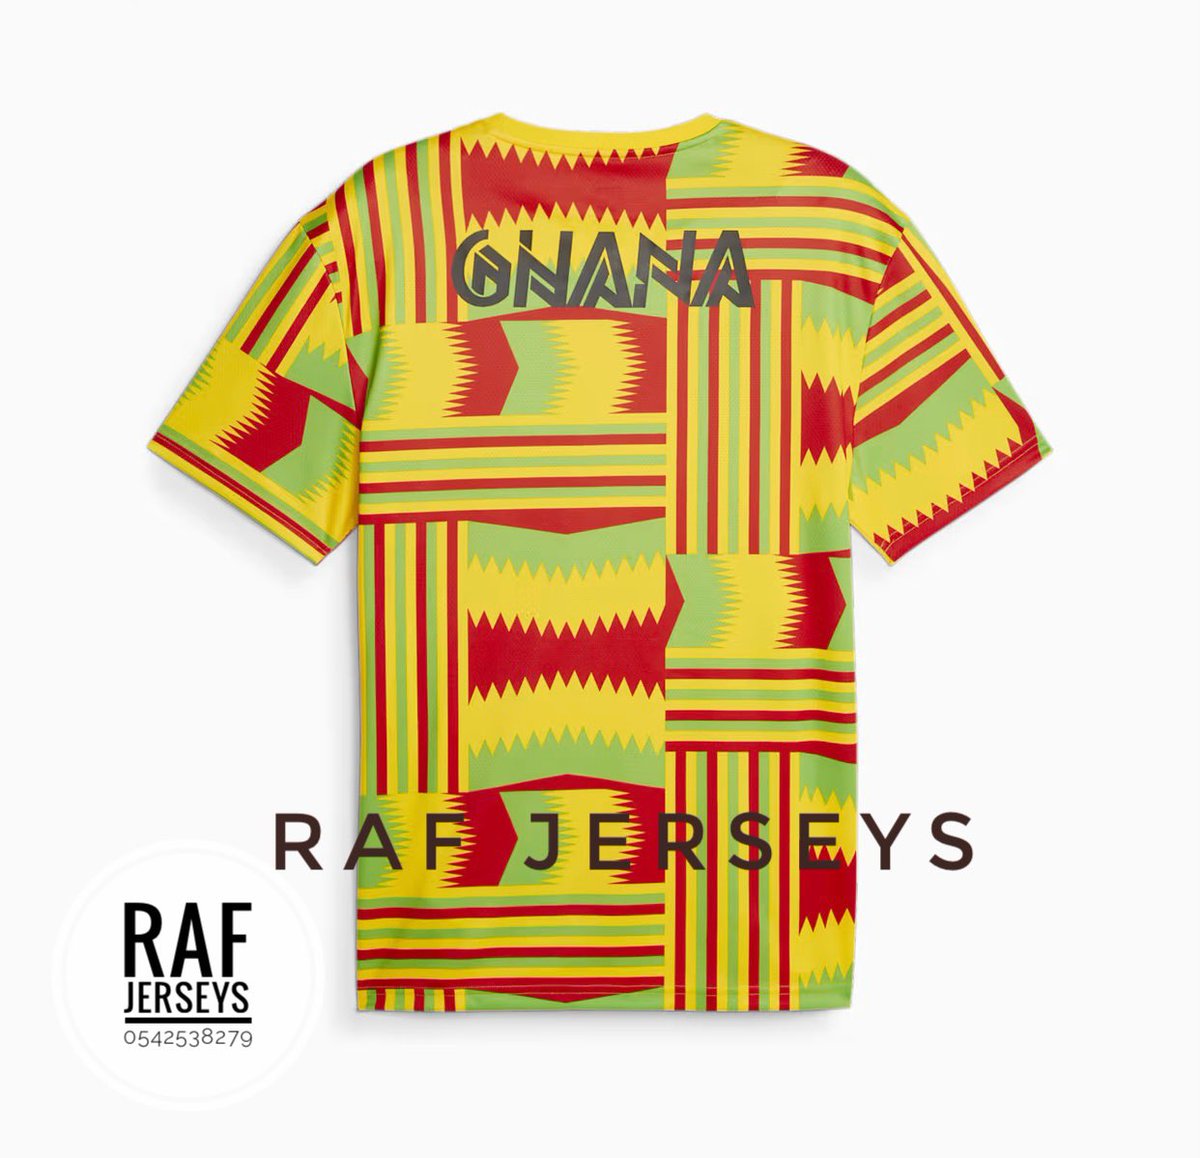 Ghana Fanwear Kit 

GHc150

Nationwide delivery at a cost

Please repost